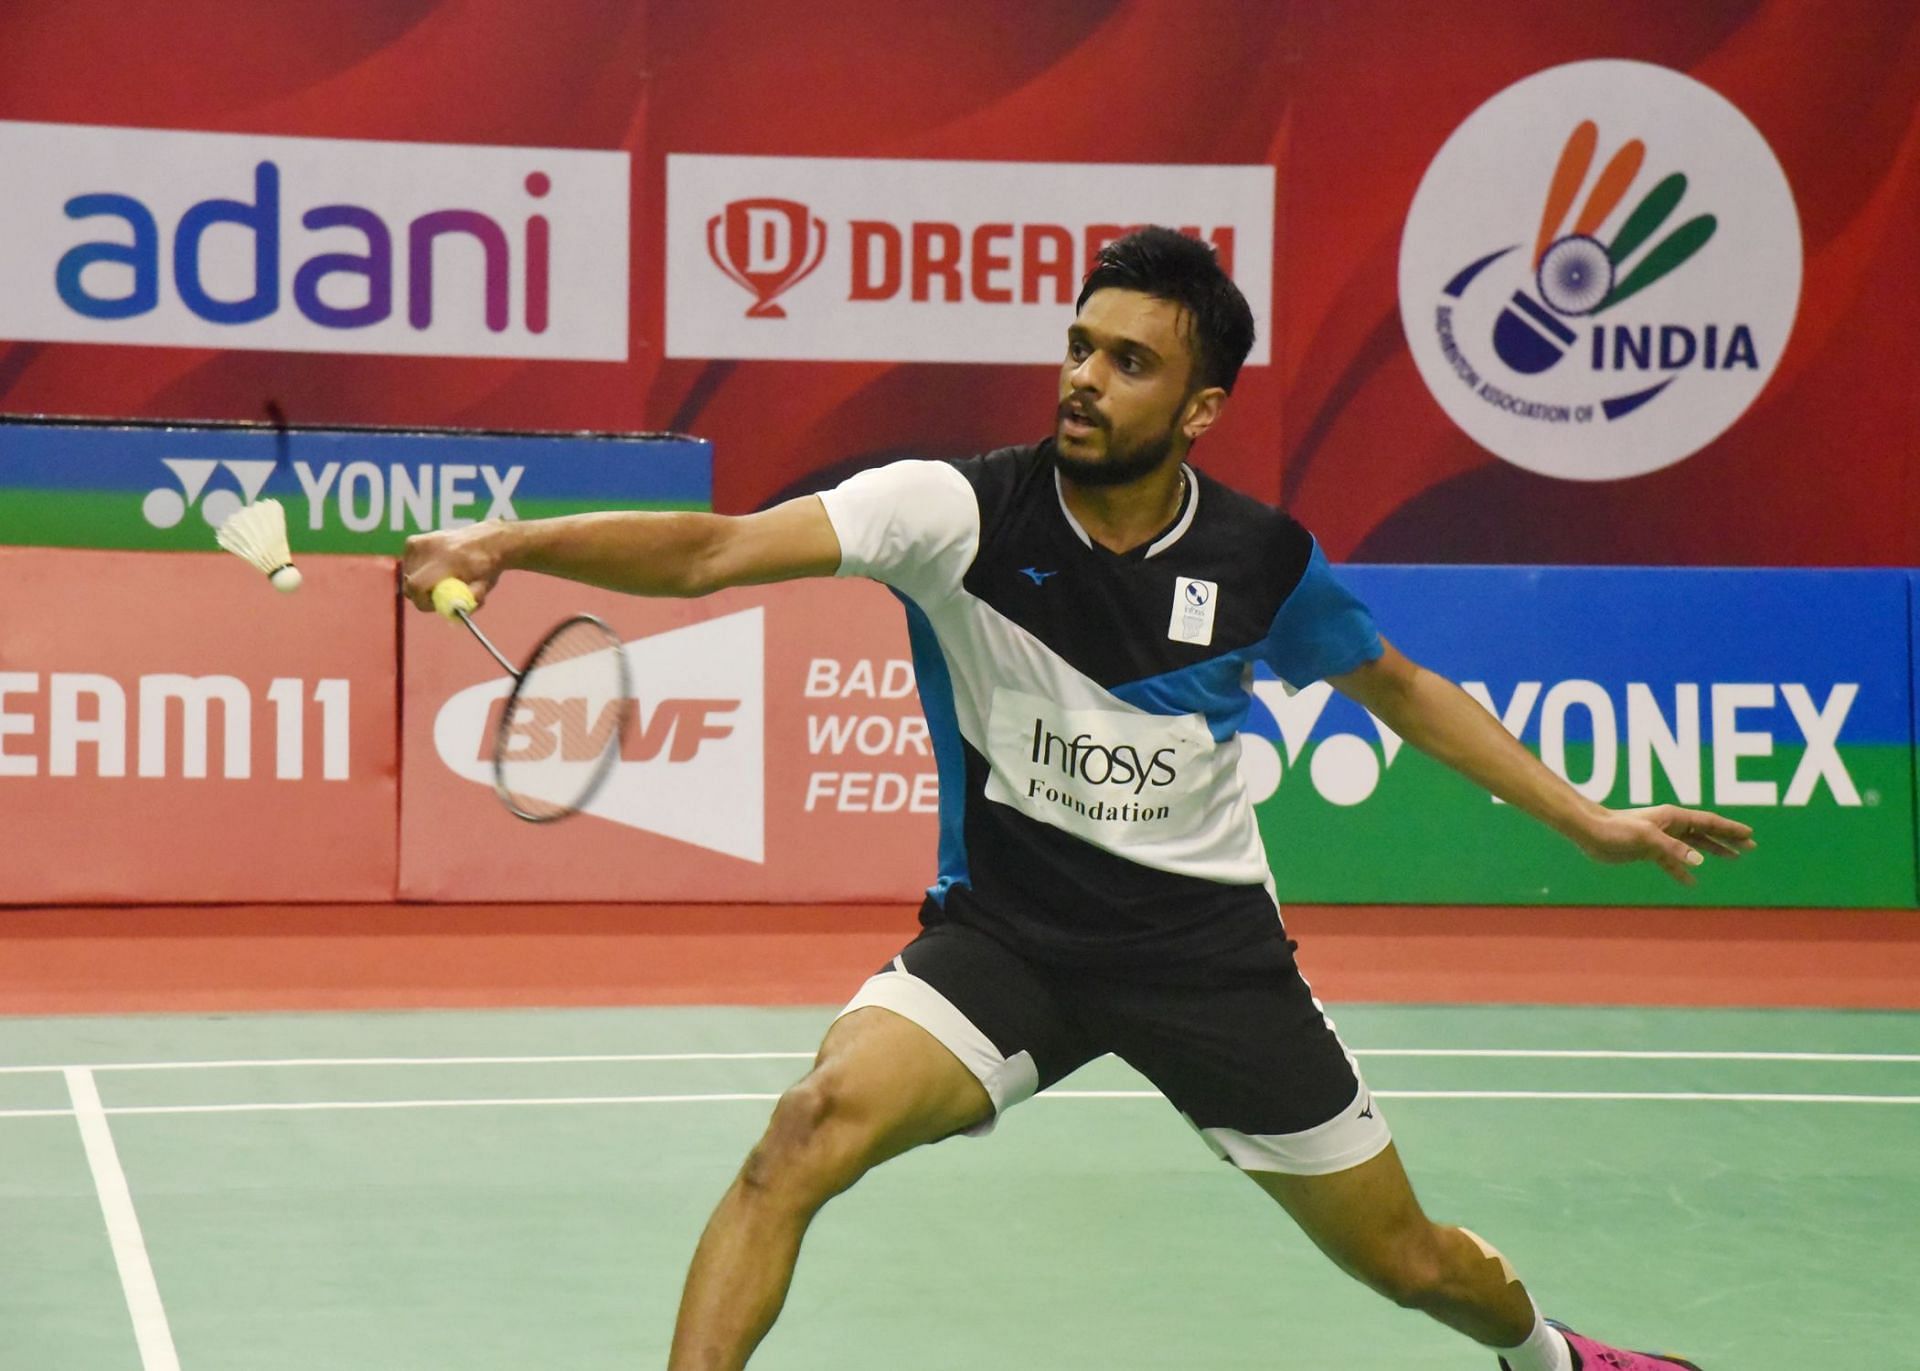 Mithun Manjunath upset seventh seed Cheam June Wei of Malaysia 21-11, 21-18 in Cuttack on Thursday. (Picture: BAI)